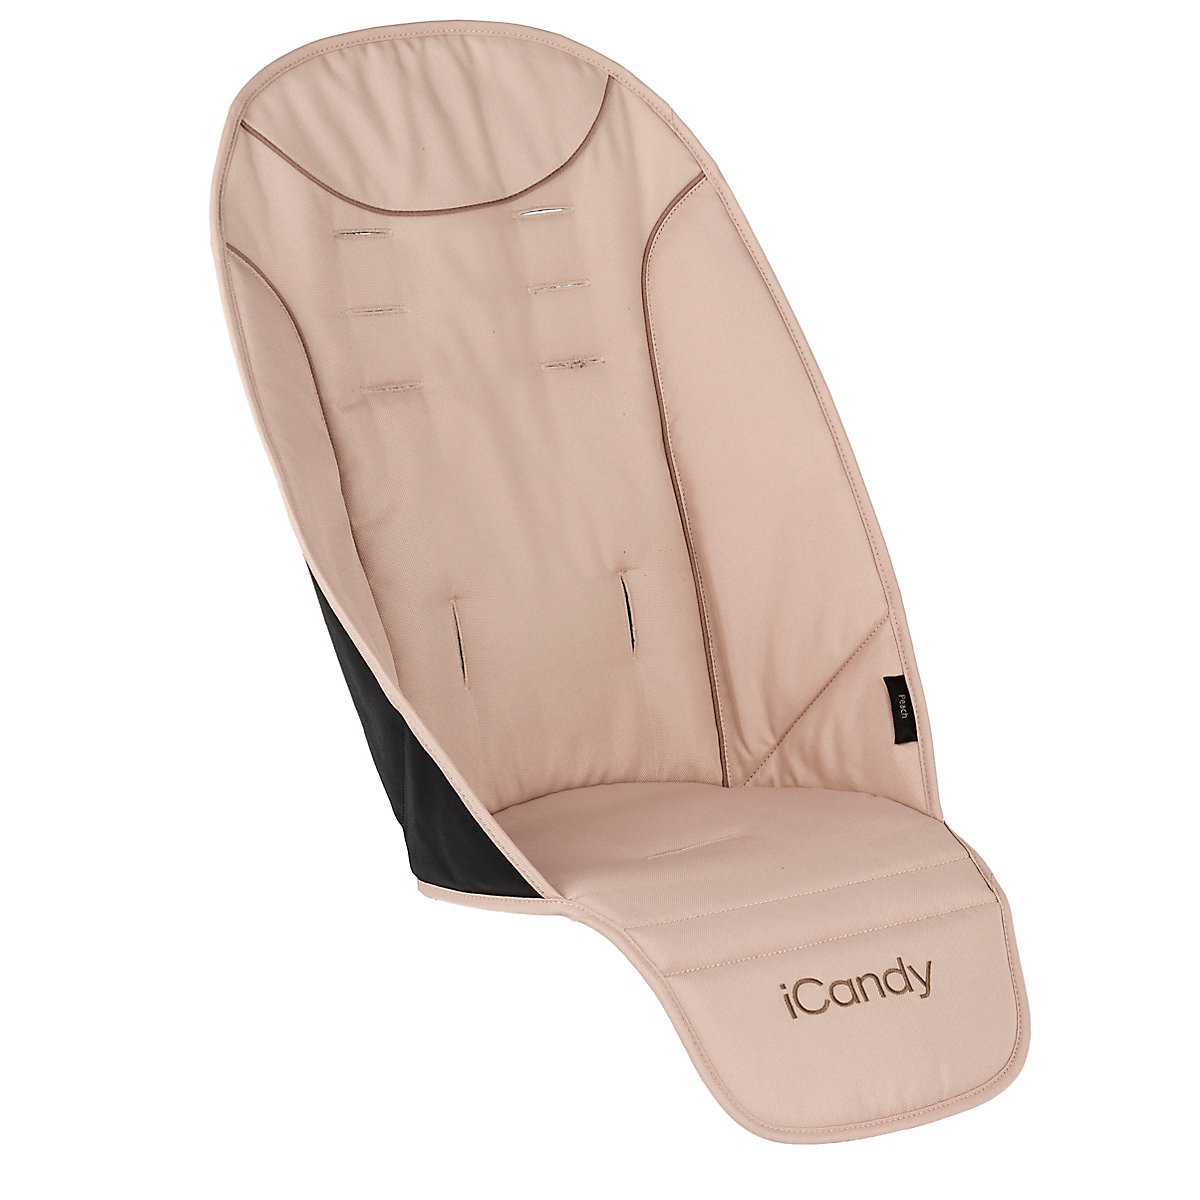 icandy peach seat liner